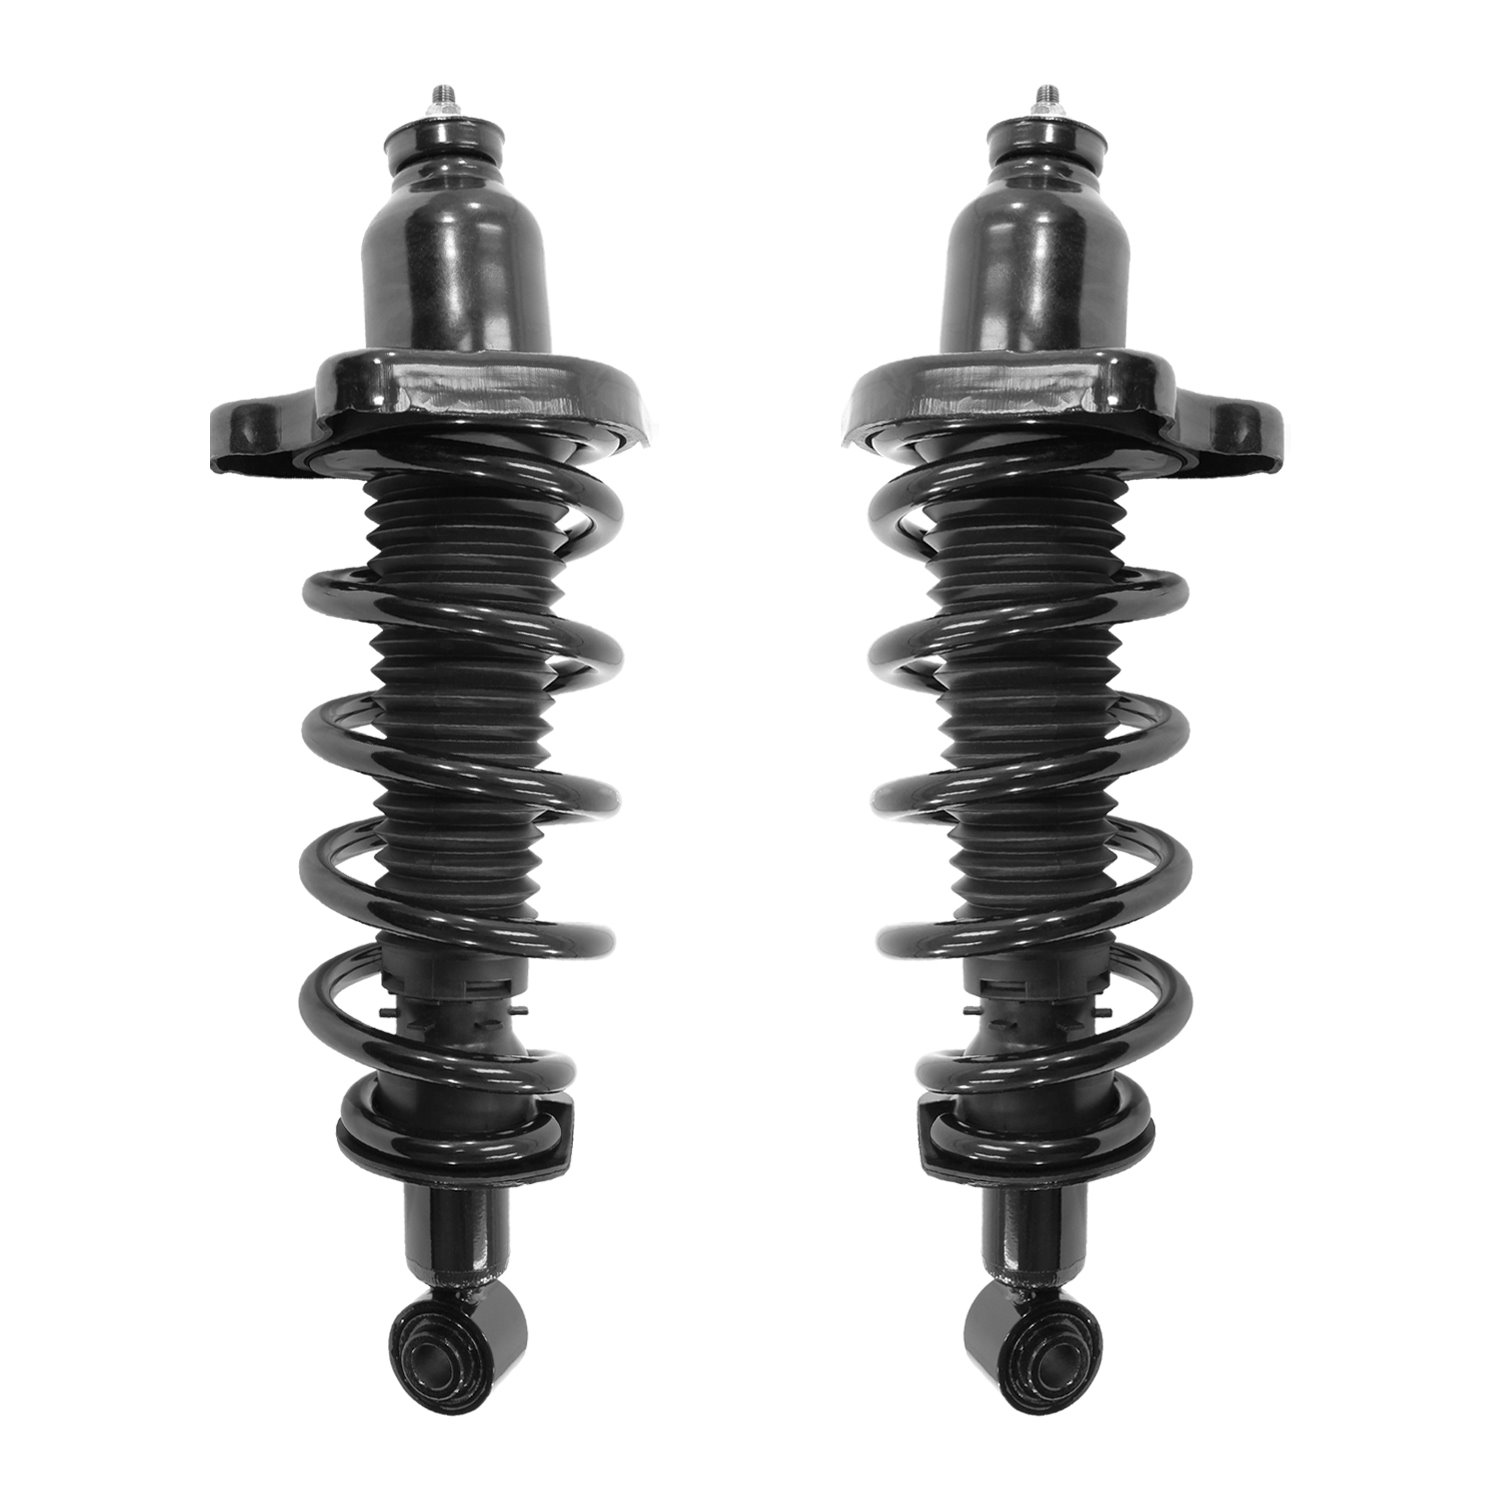 2-16071-16072-001 Rear Suspension Strut & Coil Spring Assemby Set Fits Select Acura MDX